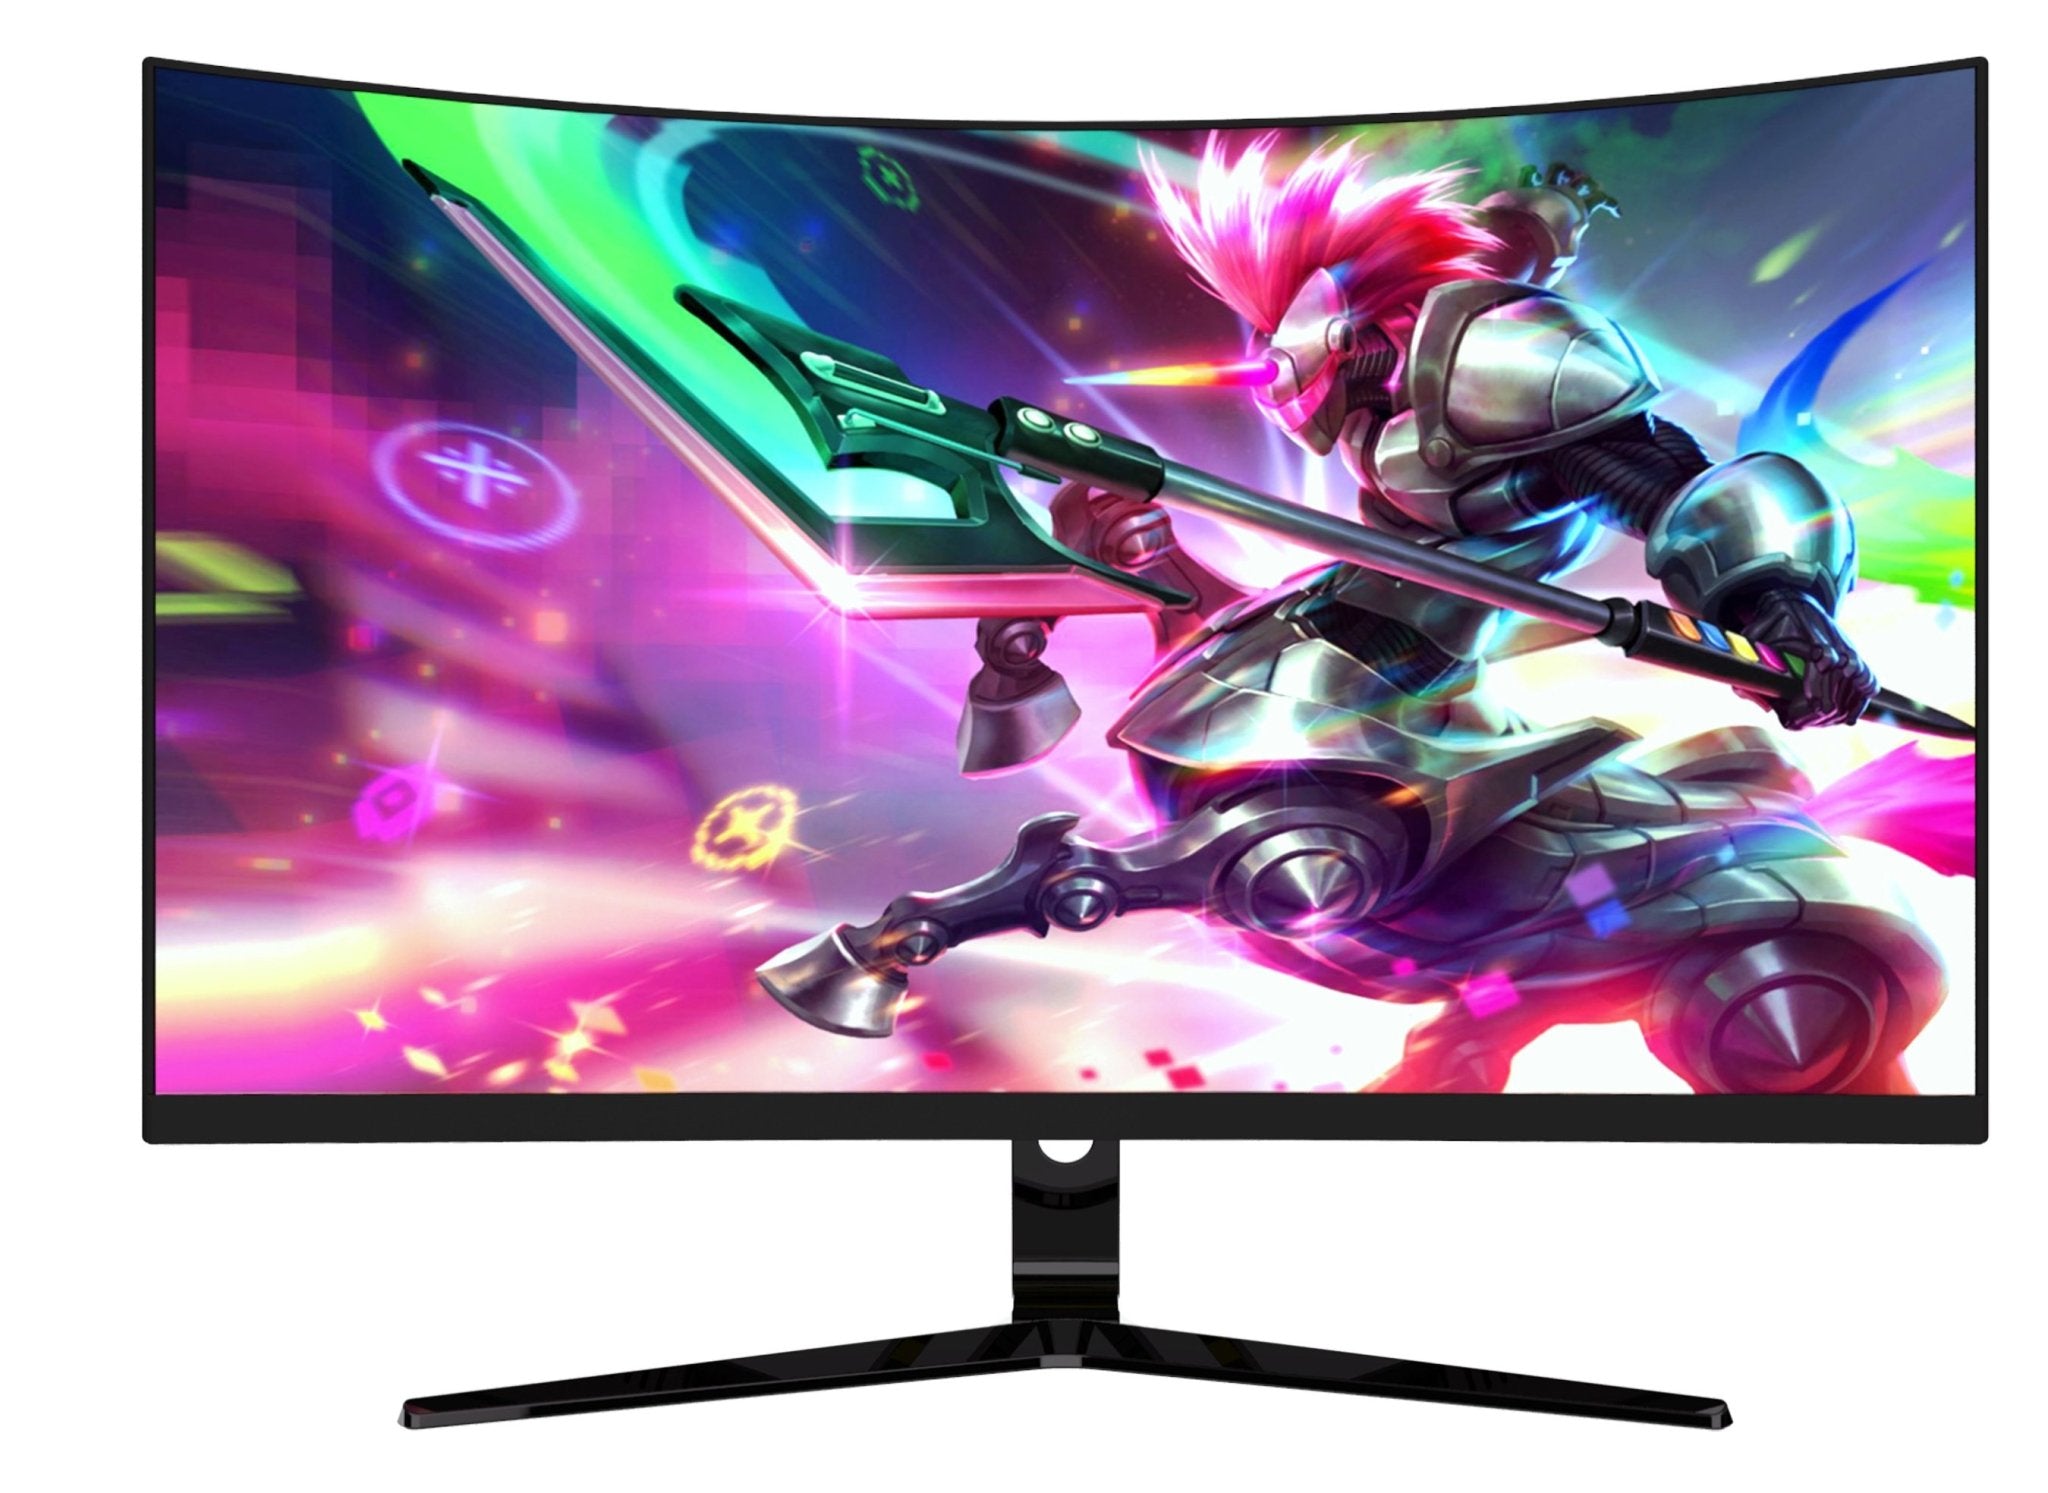 Epic Gamers 27 Inch Qhd 144hz 1ms Freesync G Sync Curved Gaming Monitor Store 974 ستور ٩٧٤